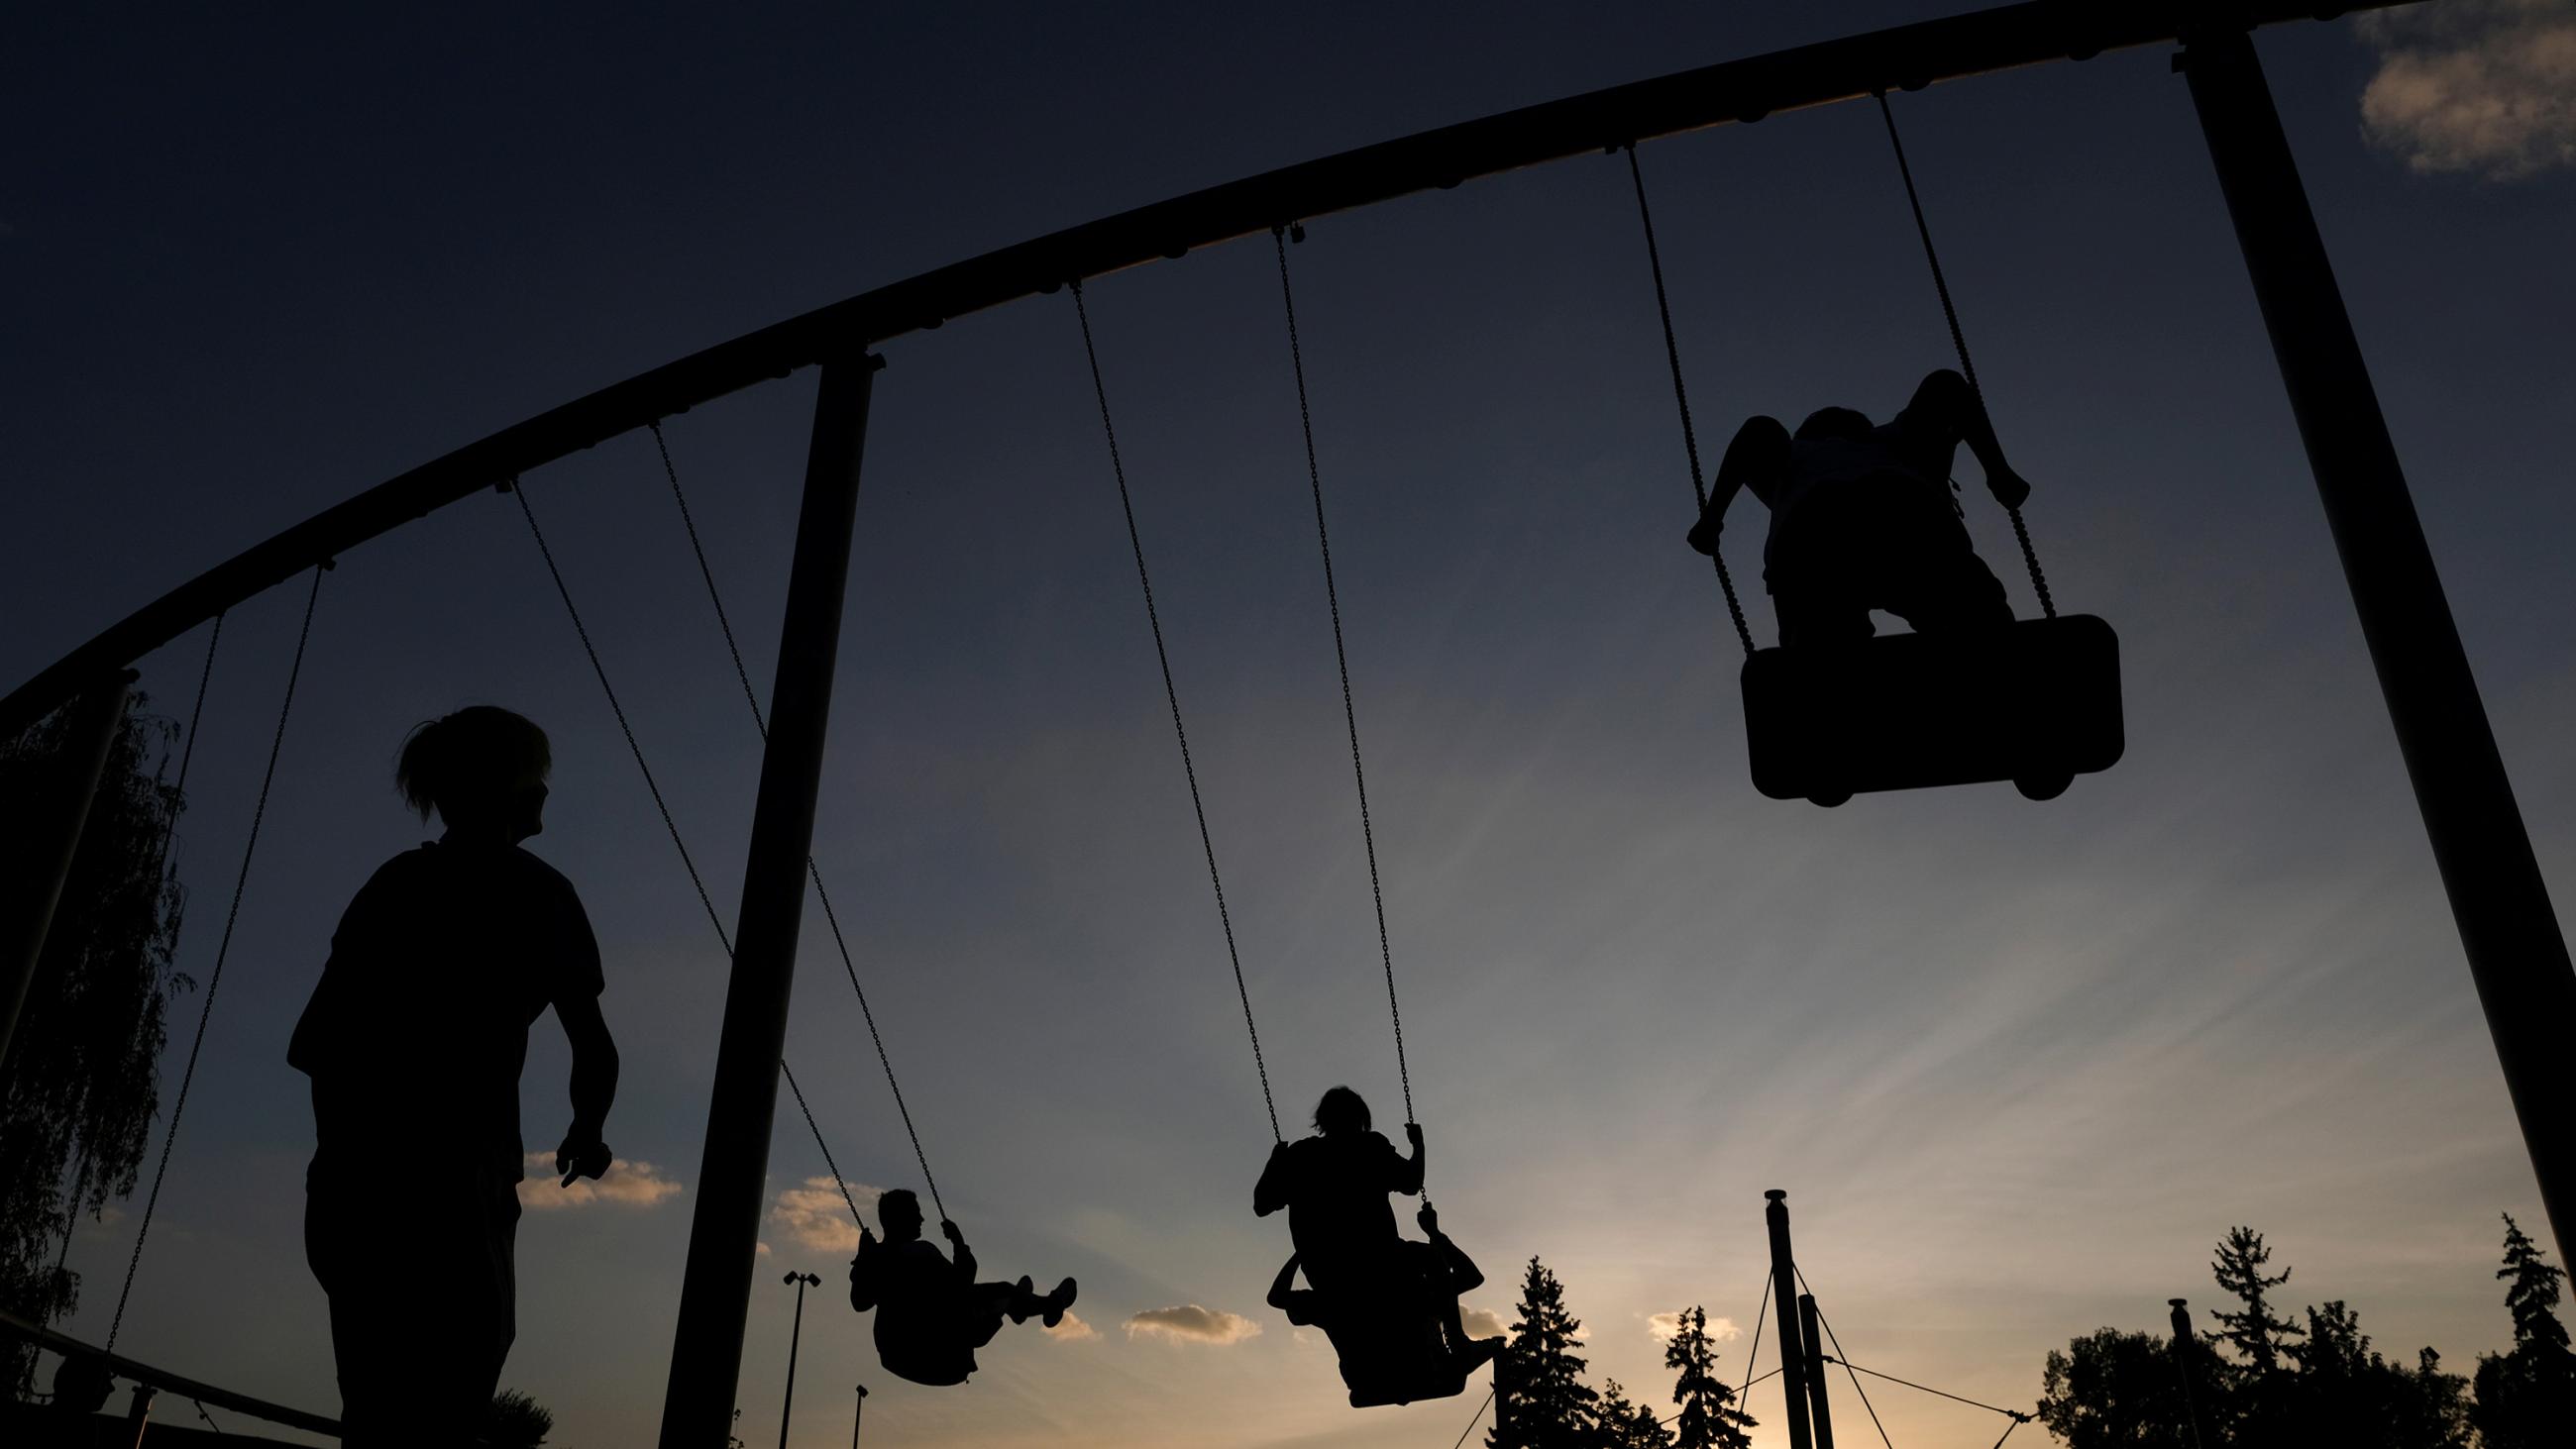 The photo shows a wide-angle shot taken behind a swing set at dusk.